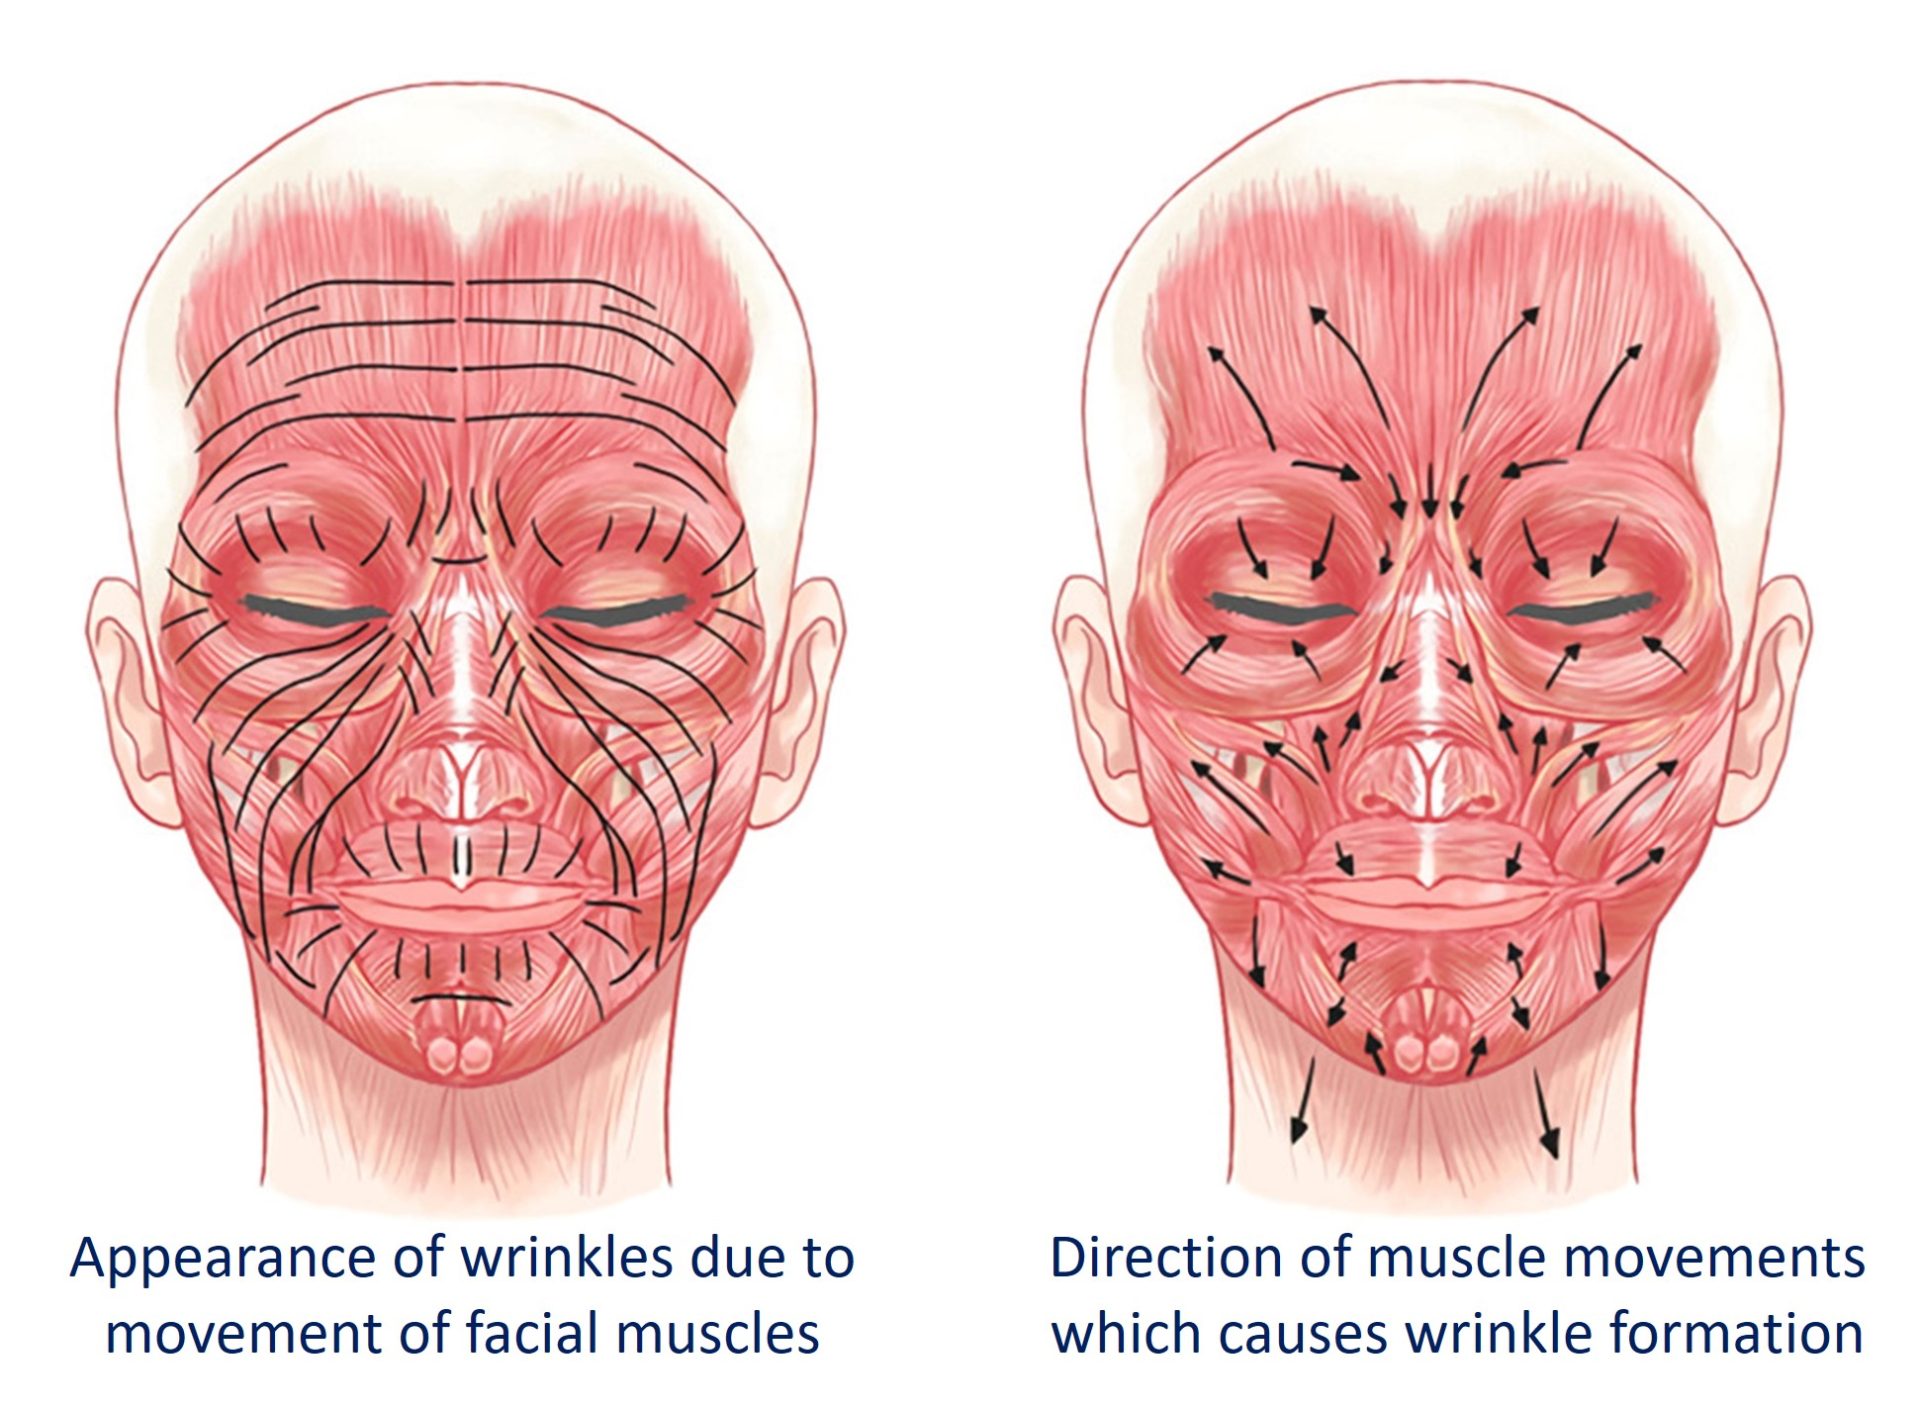 wrinkle formation from facial muscle movements